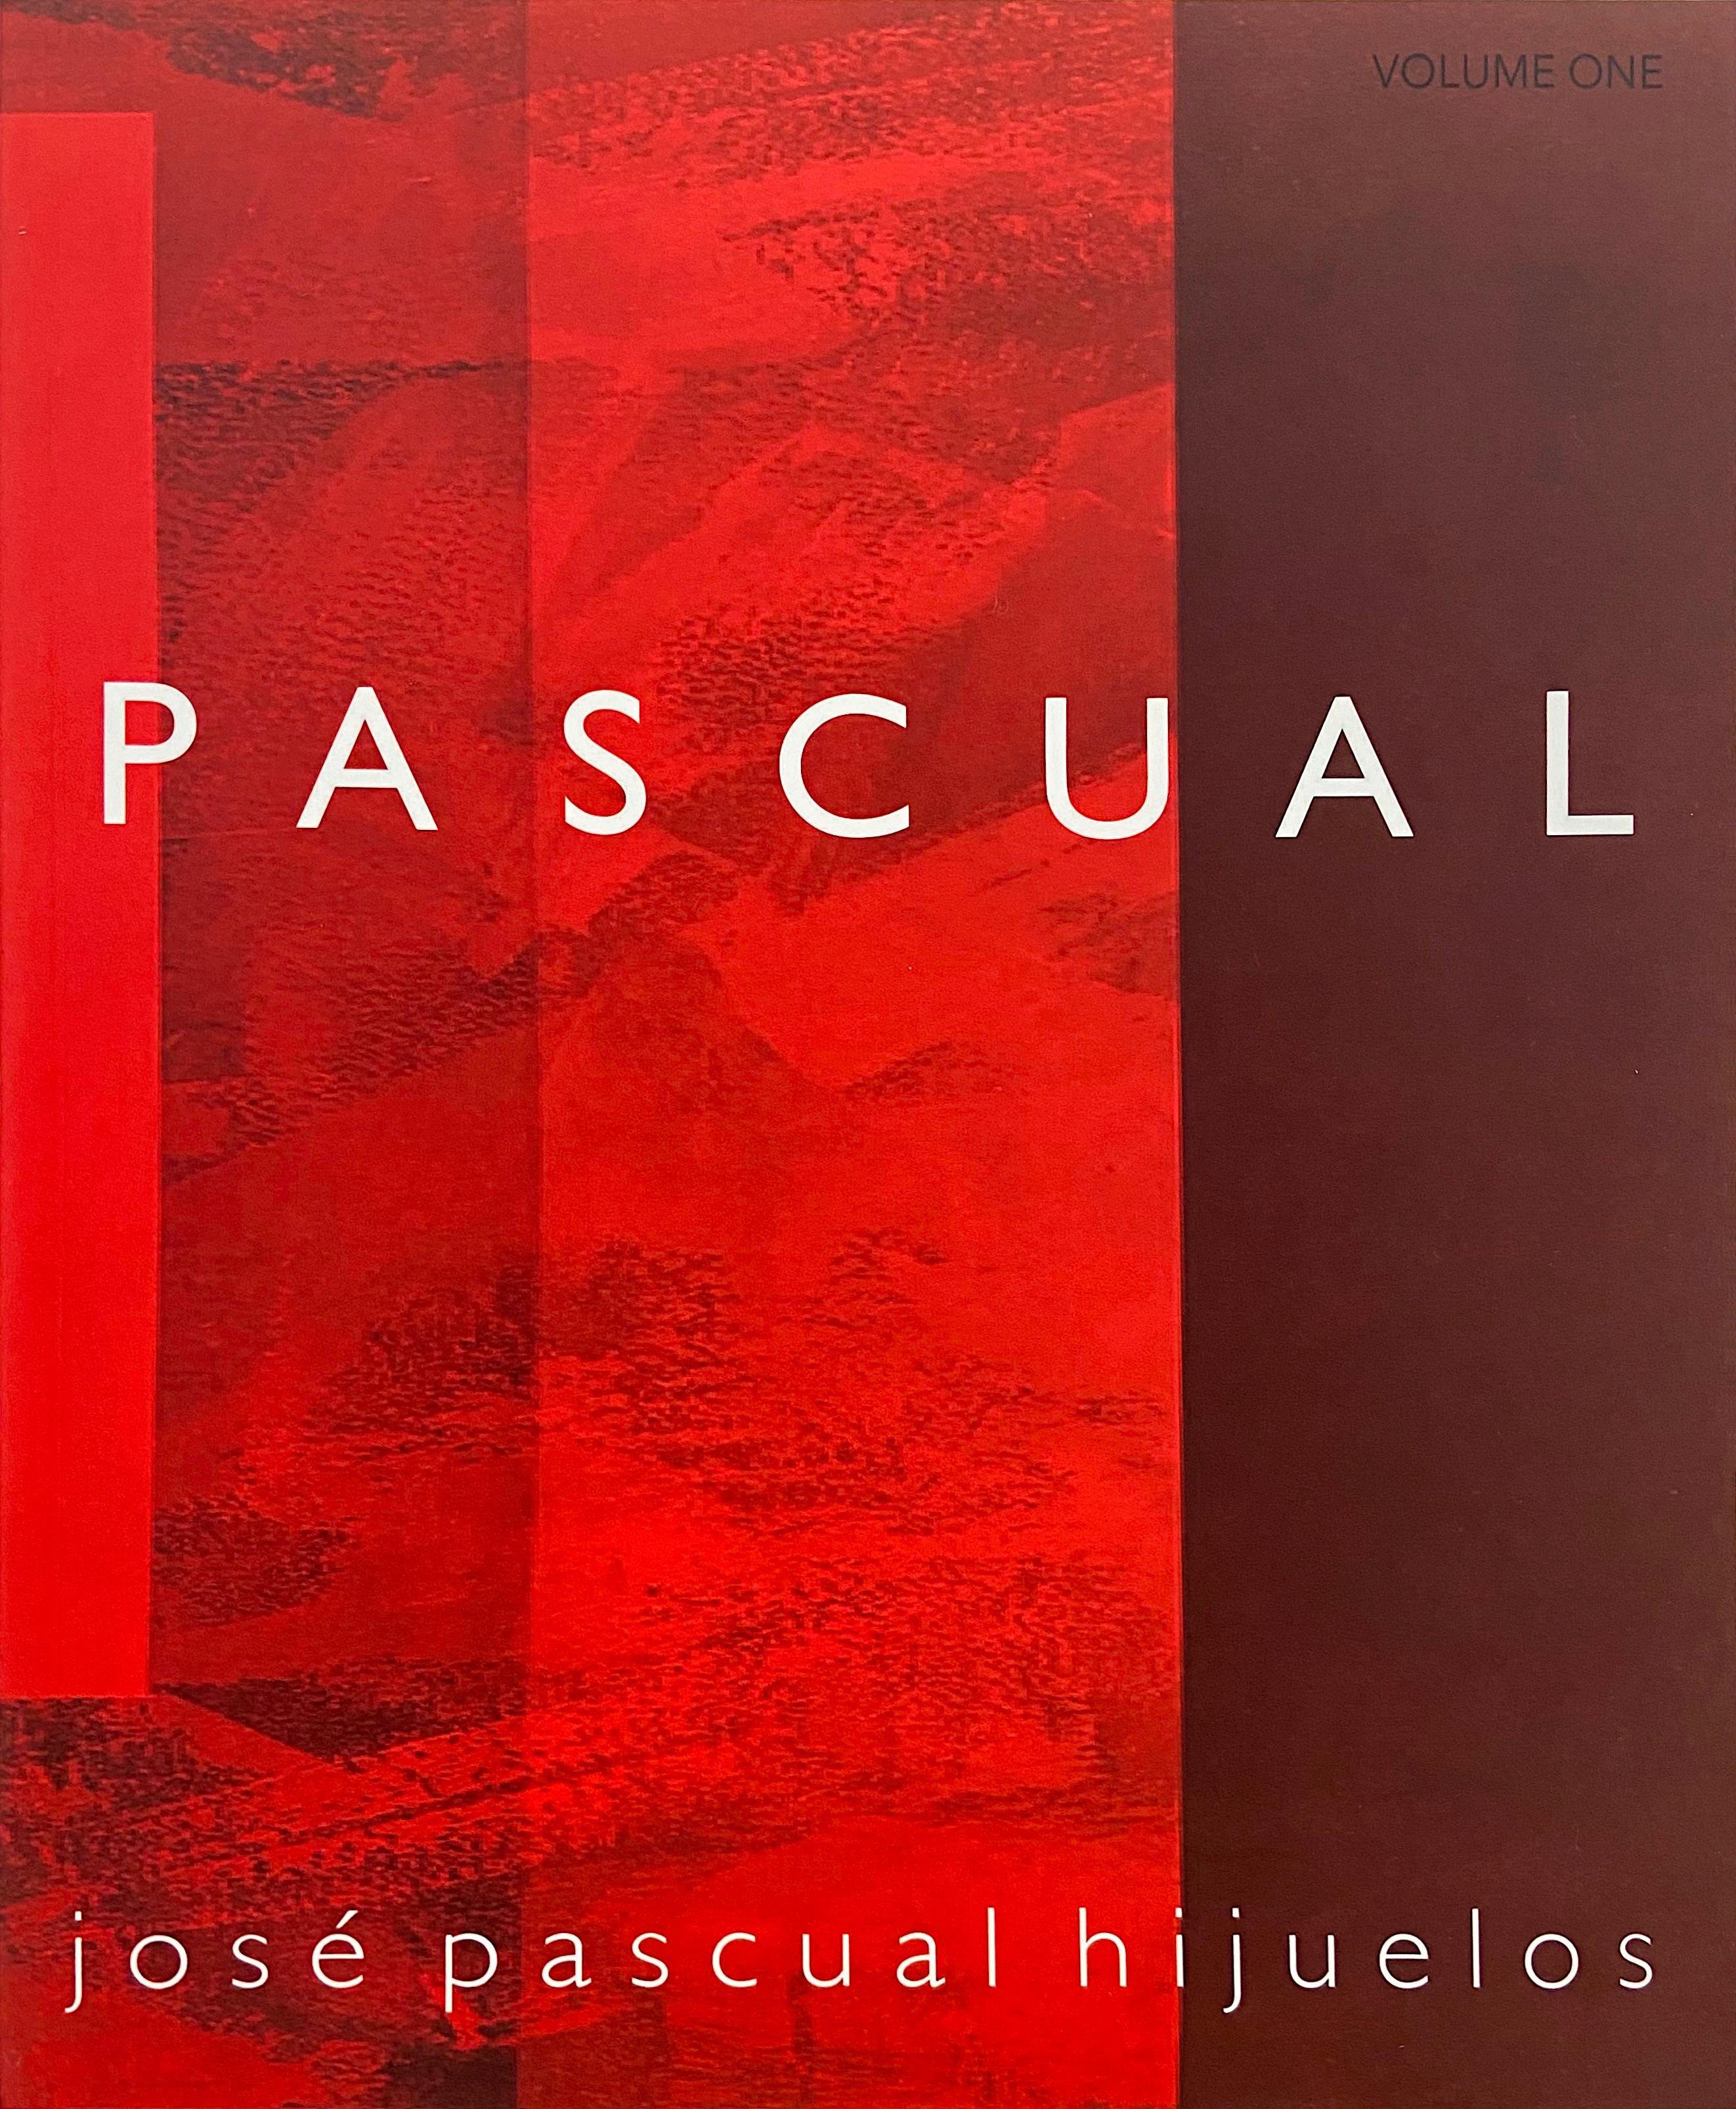 Passing - Gray Abstract Painting by Jose Pascual Hijuelos